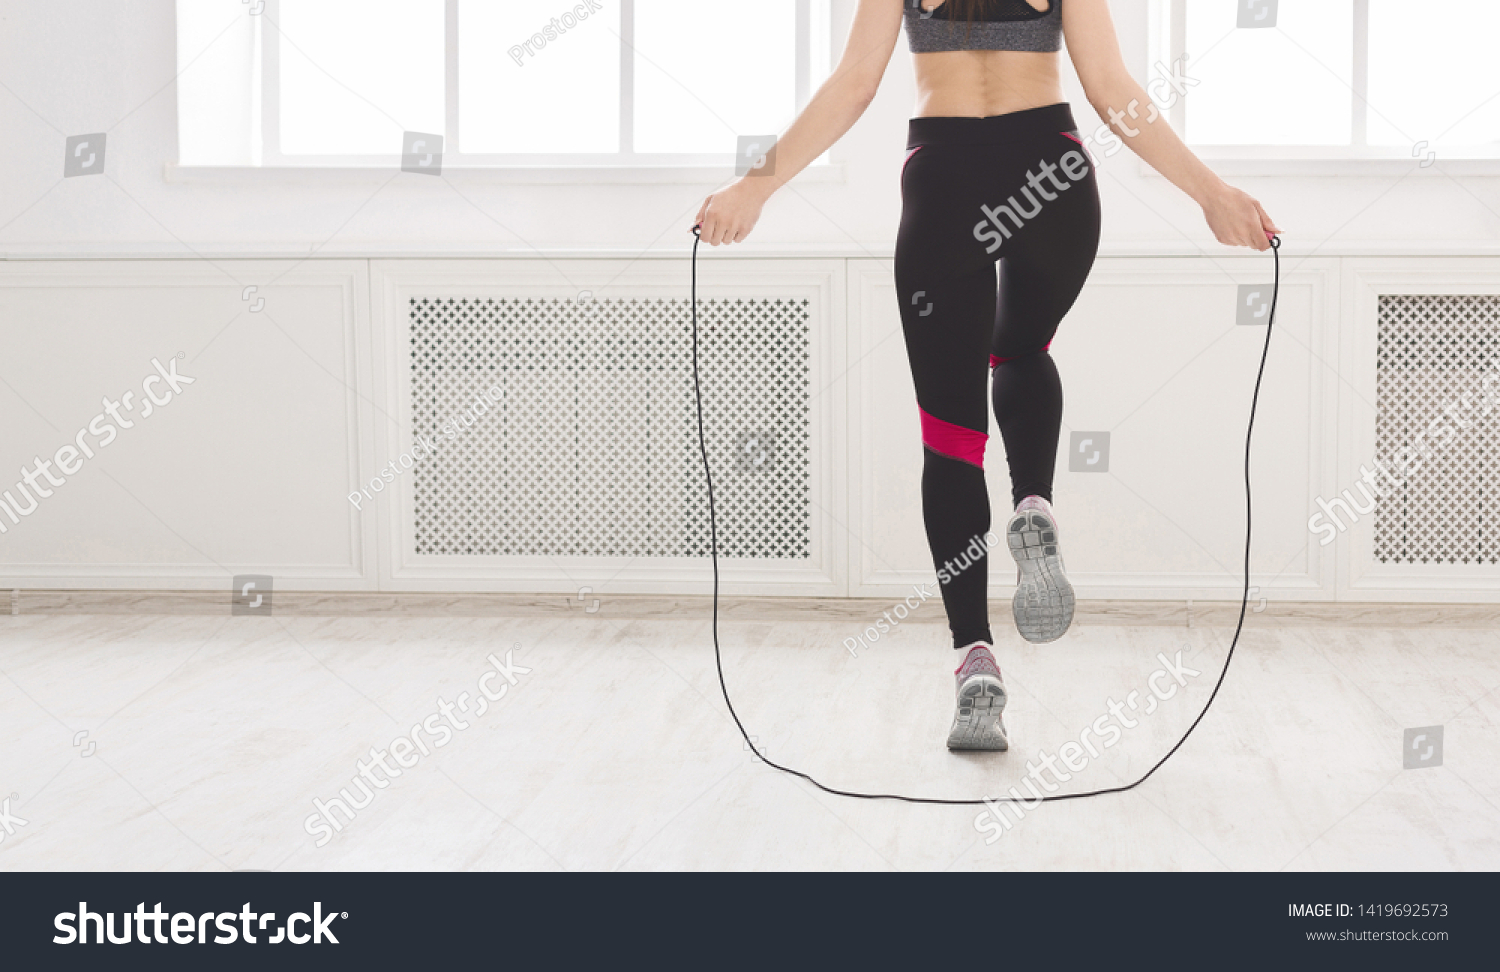 Unrecognizable woman jumping over the skipping rope in studio, crop, panorama, free space #1419692573